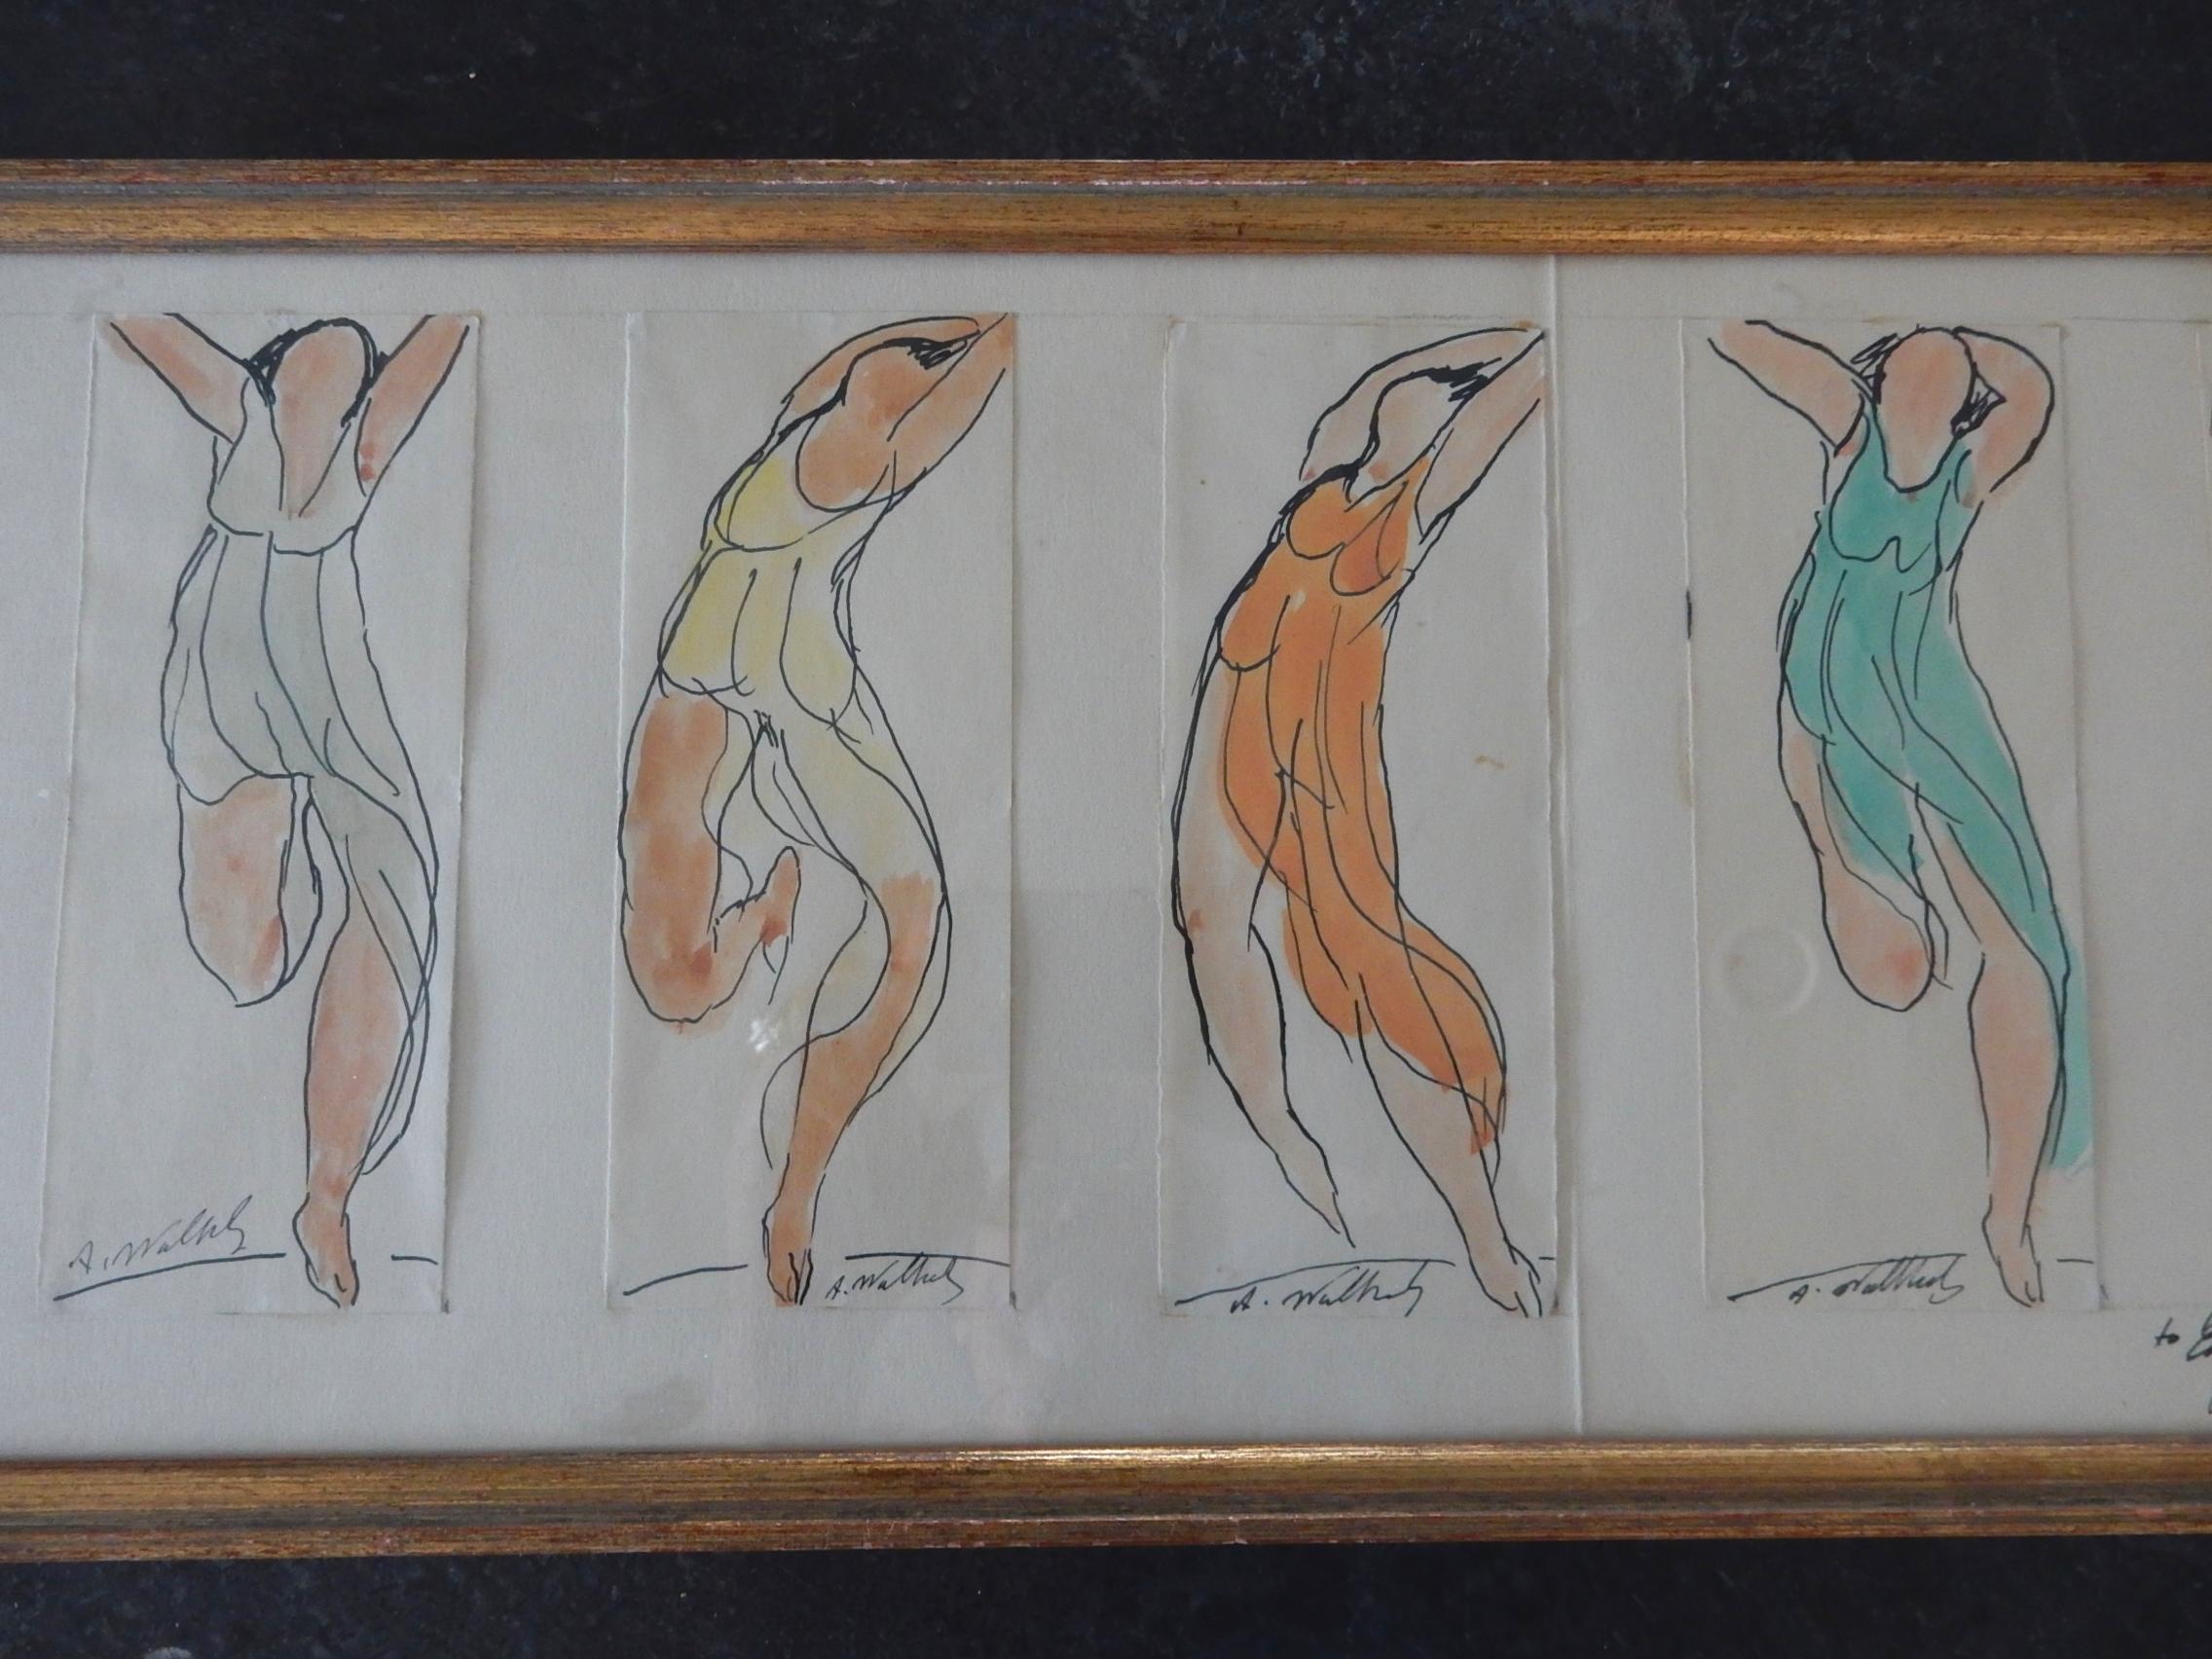 A rare set of six 7 inch x 3 inch watercolors by Abraham Walkowitz of Isadora Duncan framed in a sheet together,
circa early 1900, each signed at bottom and gifted to Edward G. Robinson for his personal art collection.
Framed size 23 x